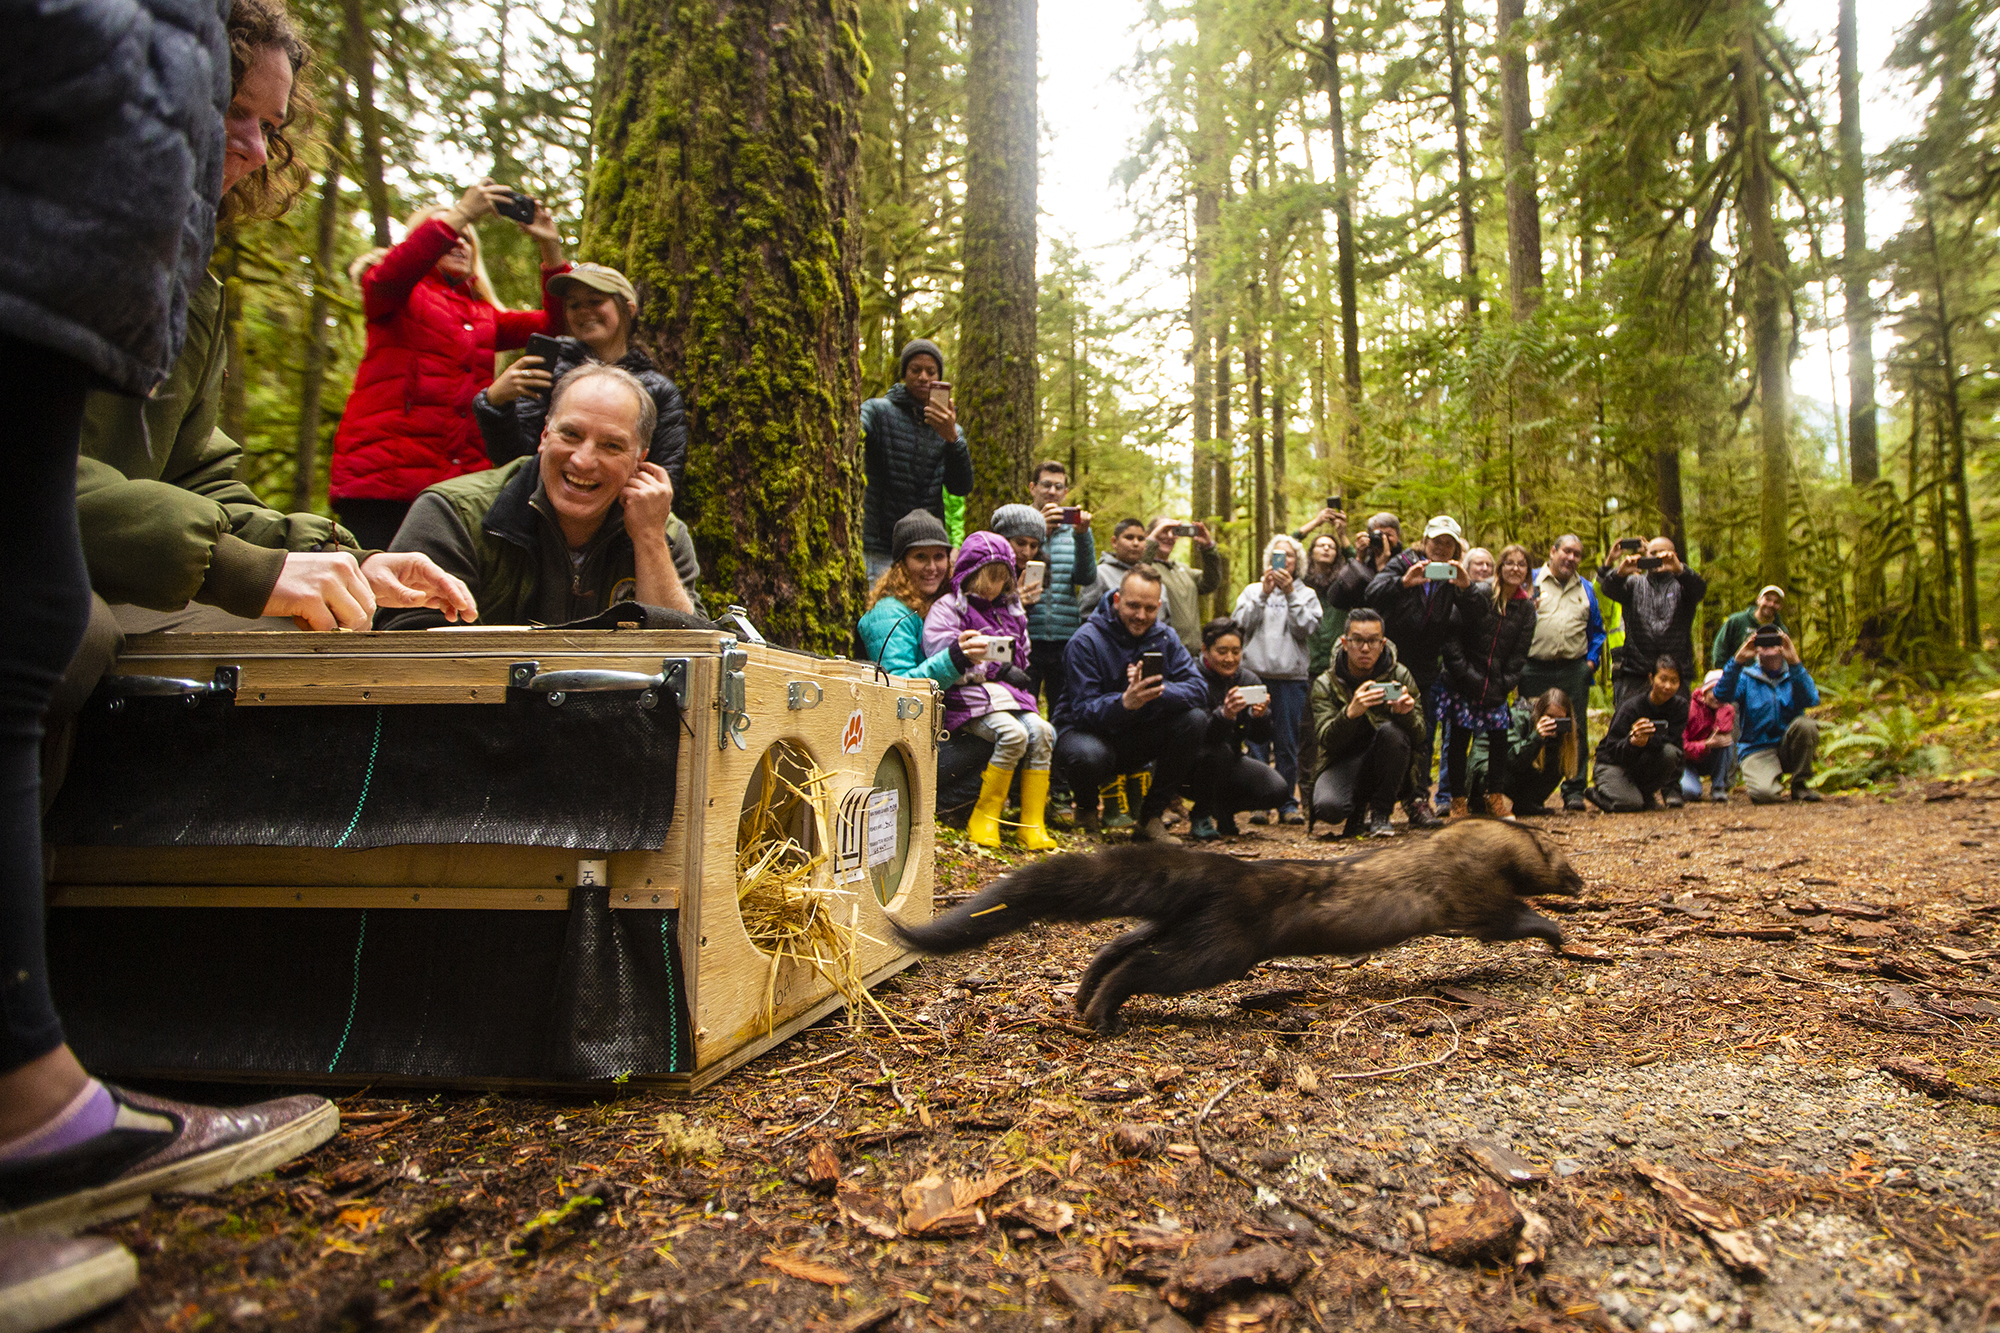 Biologists and members of the public release fishers at Buck Creek in North Cascades National Park on October 24, 2019. Photo: David Moscowitz courtesy of Conservation Northwest.